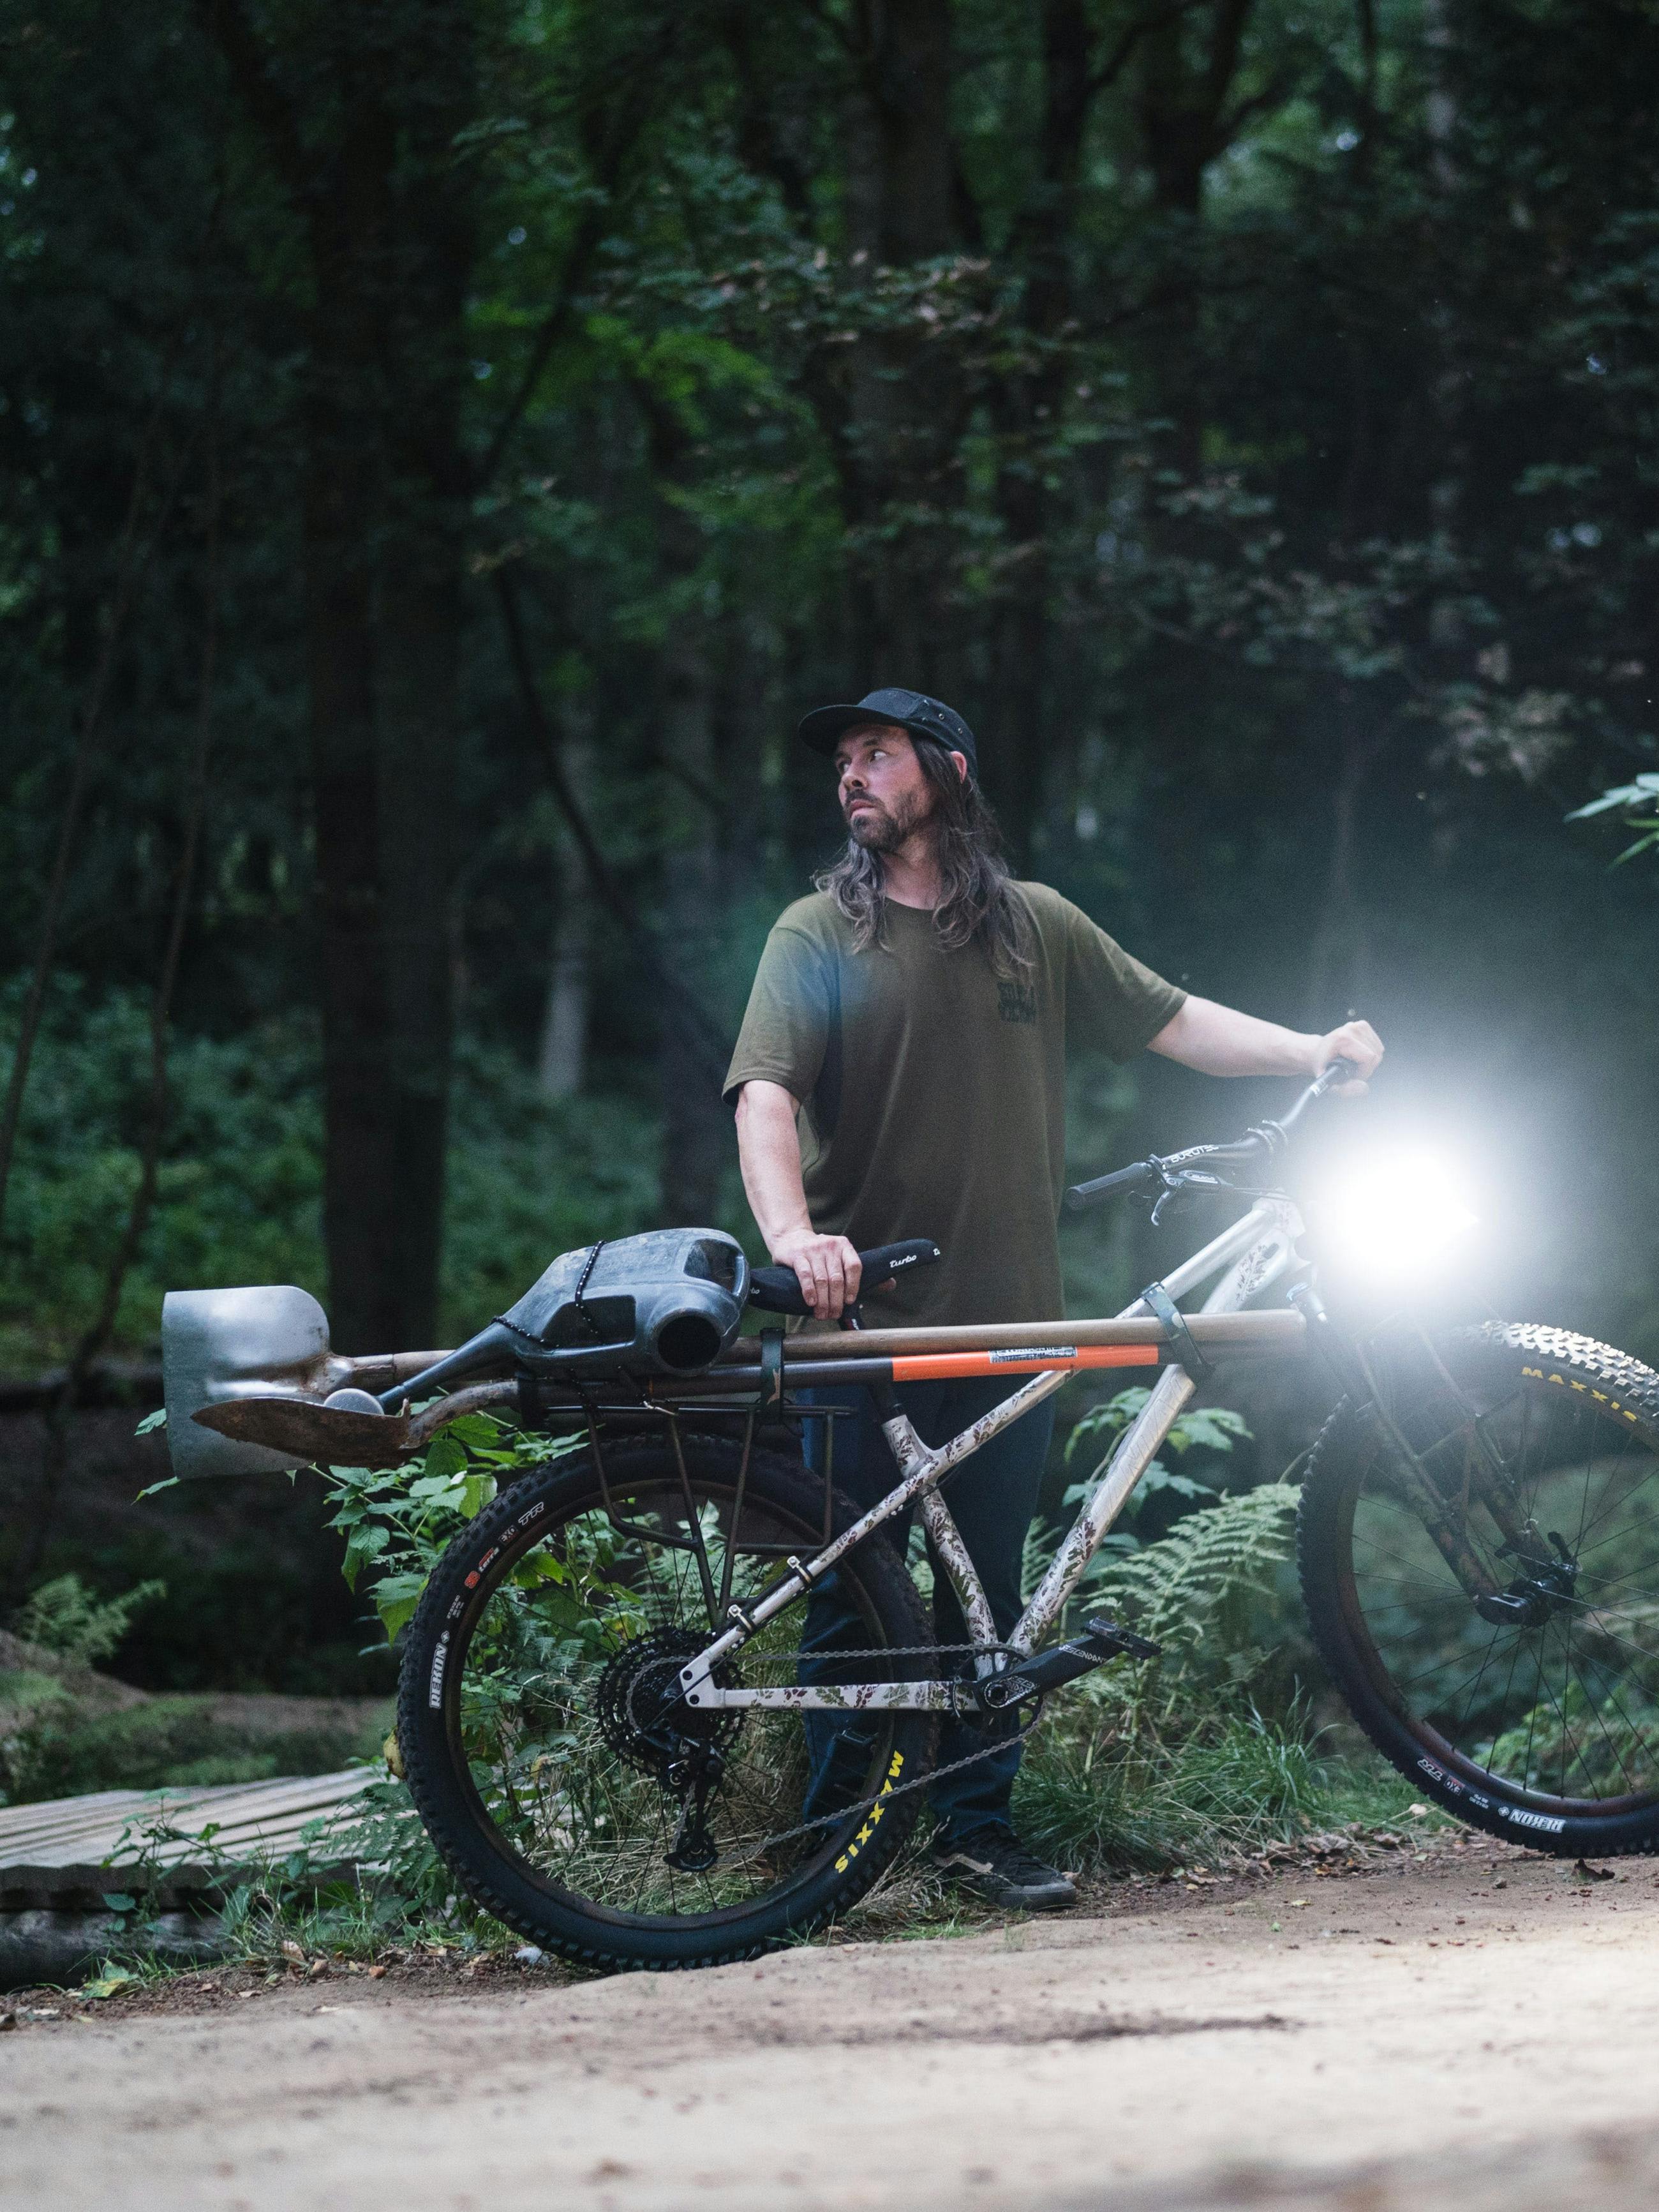 Bikepacking with the Chameleon and Lights